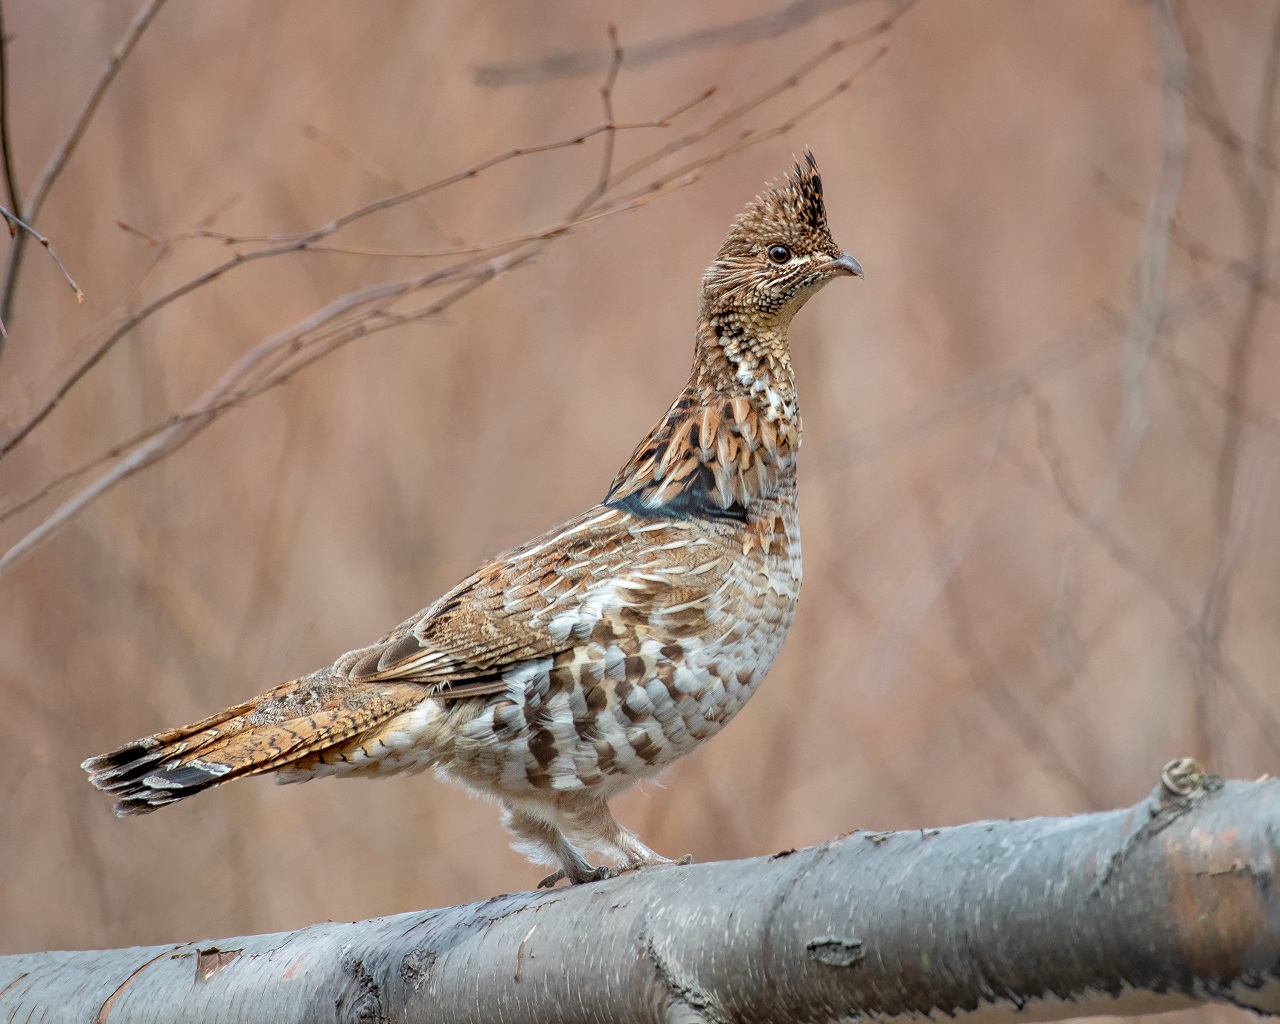 Michigan has an exquisite ruffed grouse population.